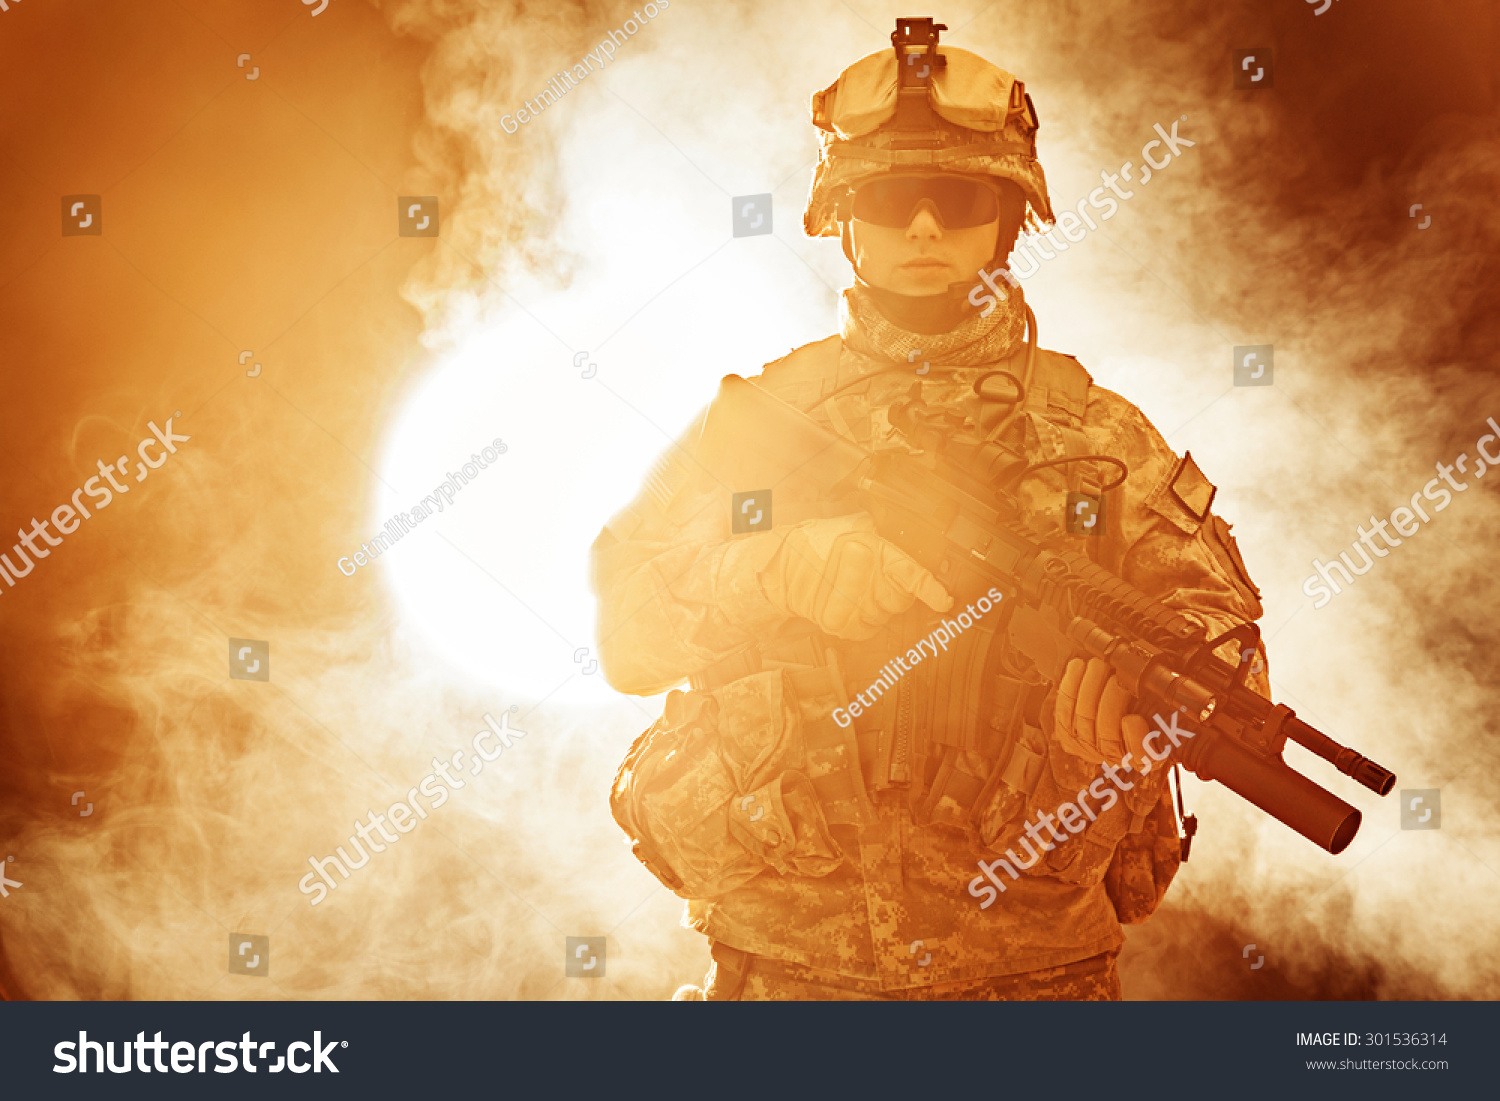 United States paratrooper airborne infantry in the smoke #301536314